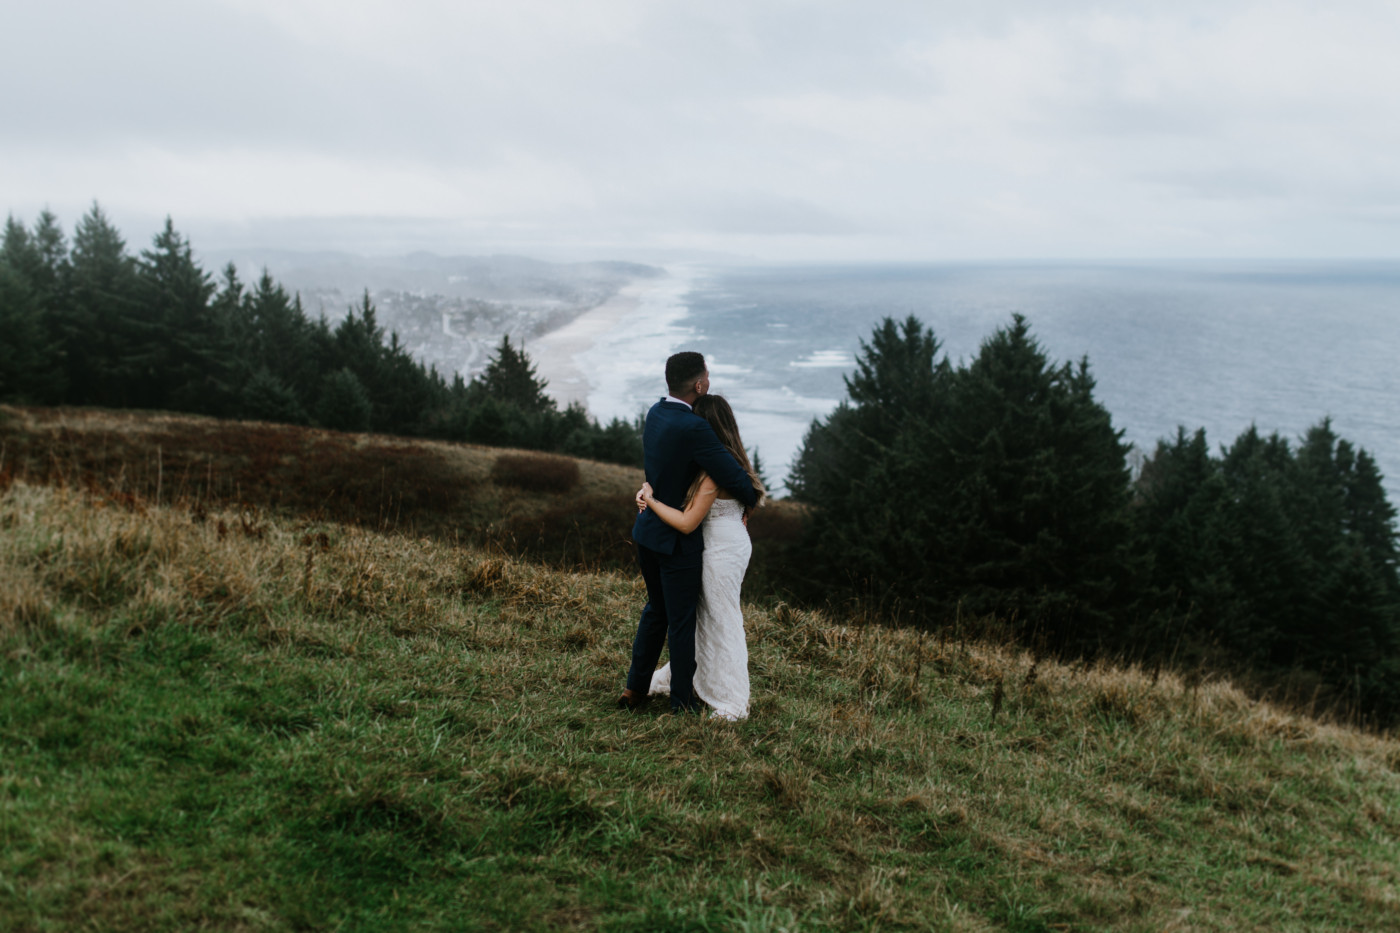 Deandre and Ariana hug after their ceremony. Elopement photography at Mount Hood by Sienna Plus Josh.